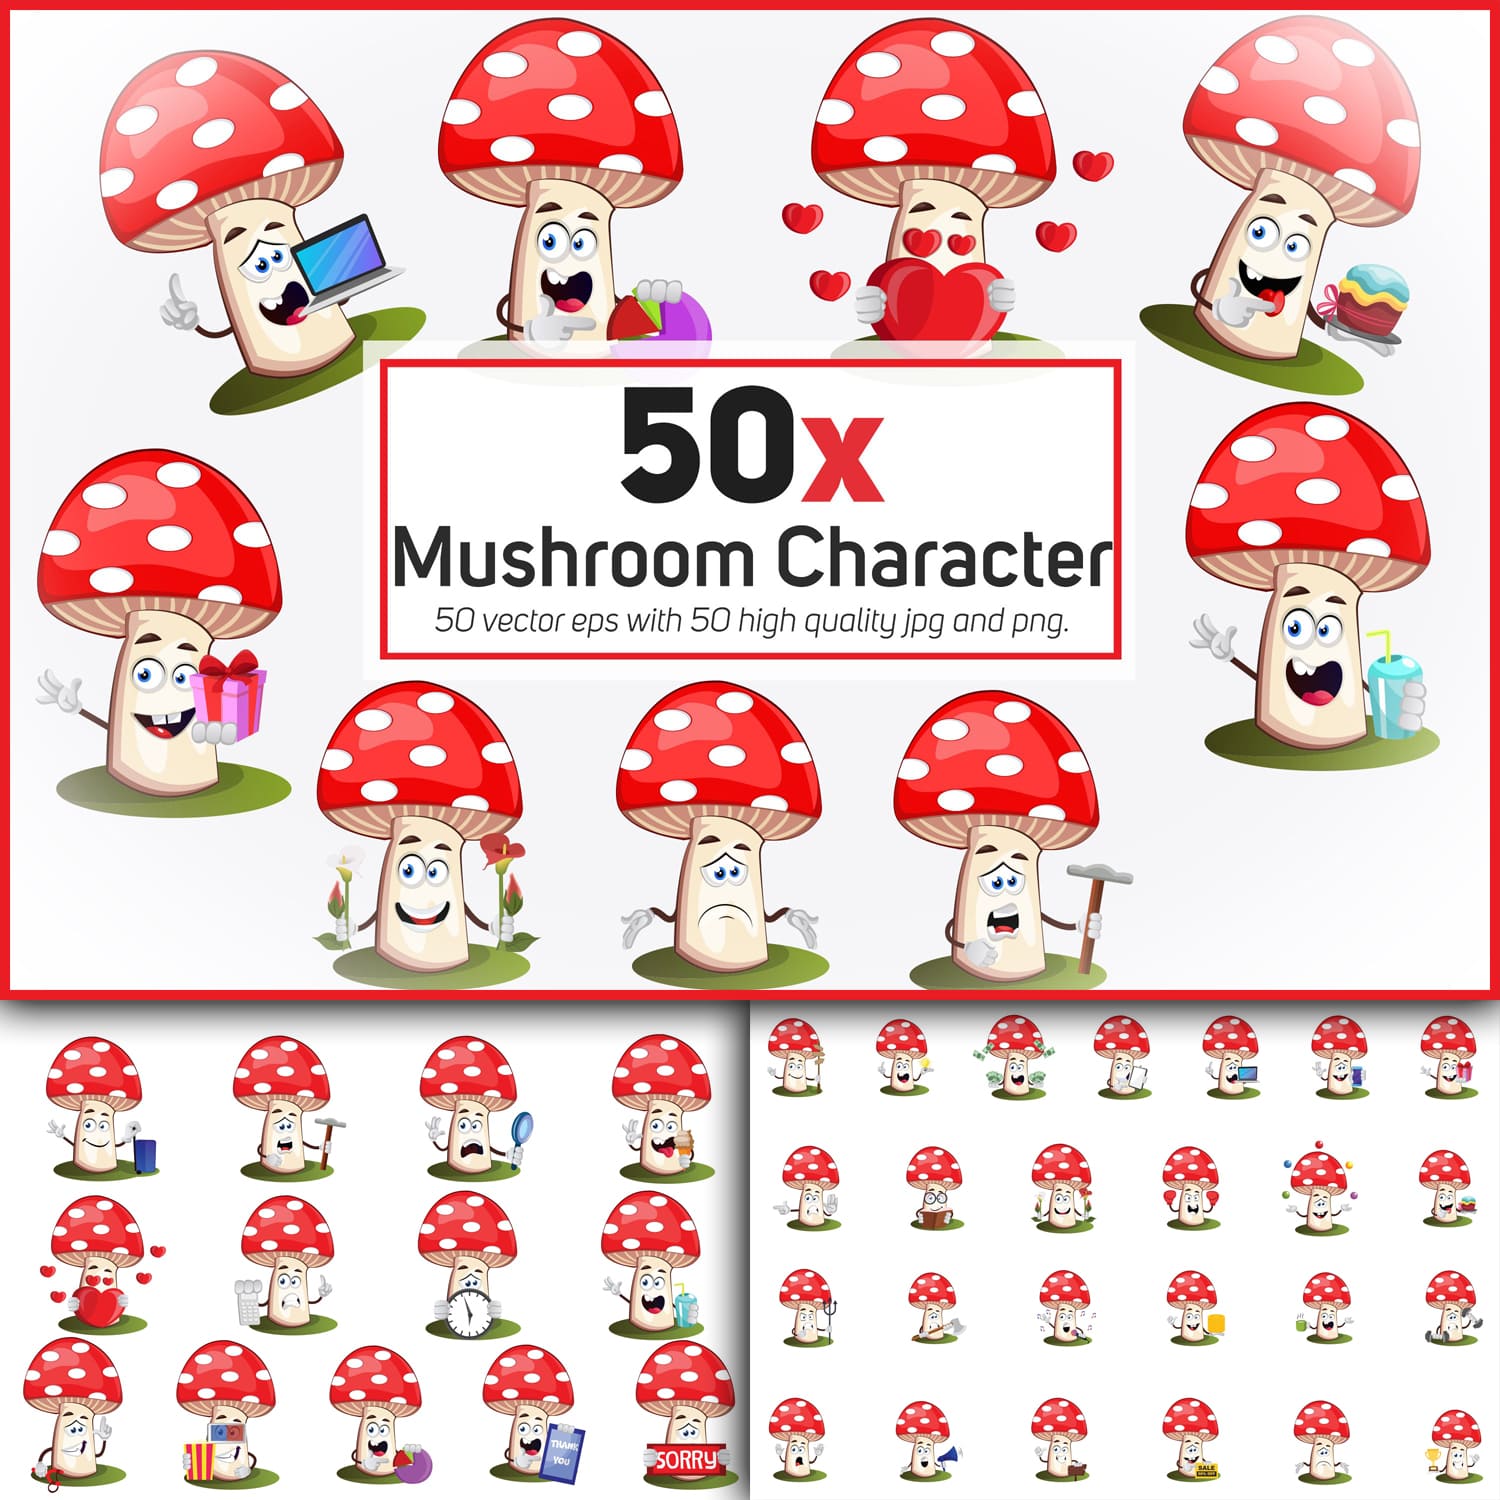 38x Mushroom Character and mascot collection illustration.